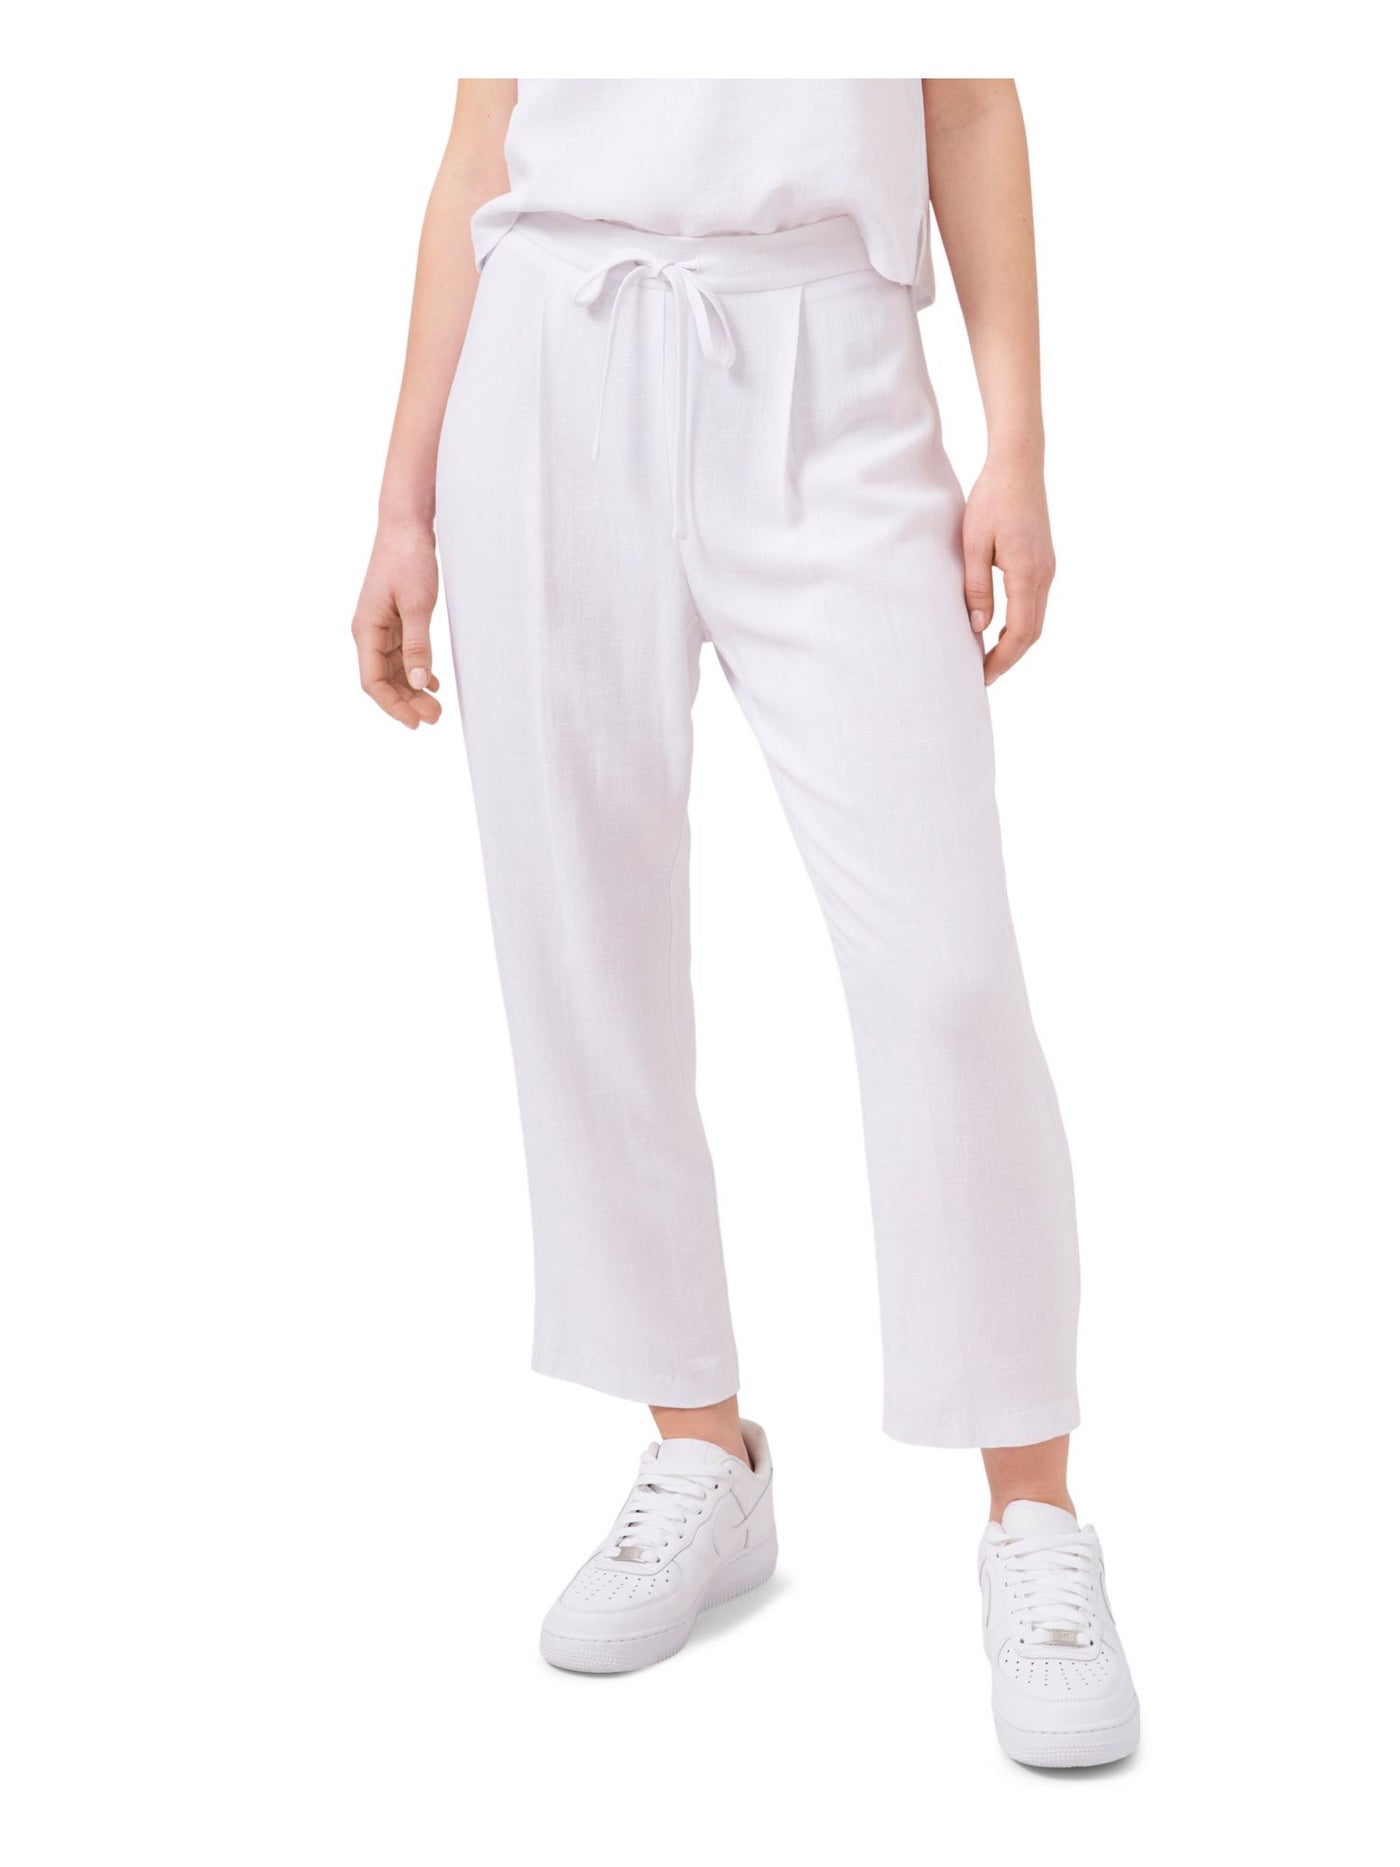 RILEY&RAE Womens Pleated Tie 24' Inseam  Pull-on Styling Straight leg Pants